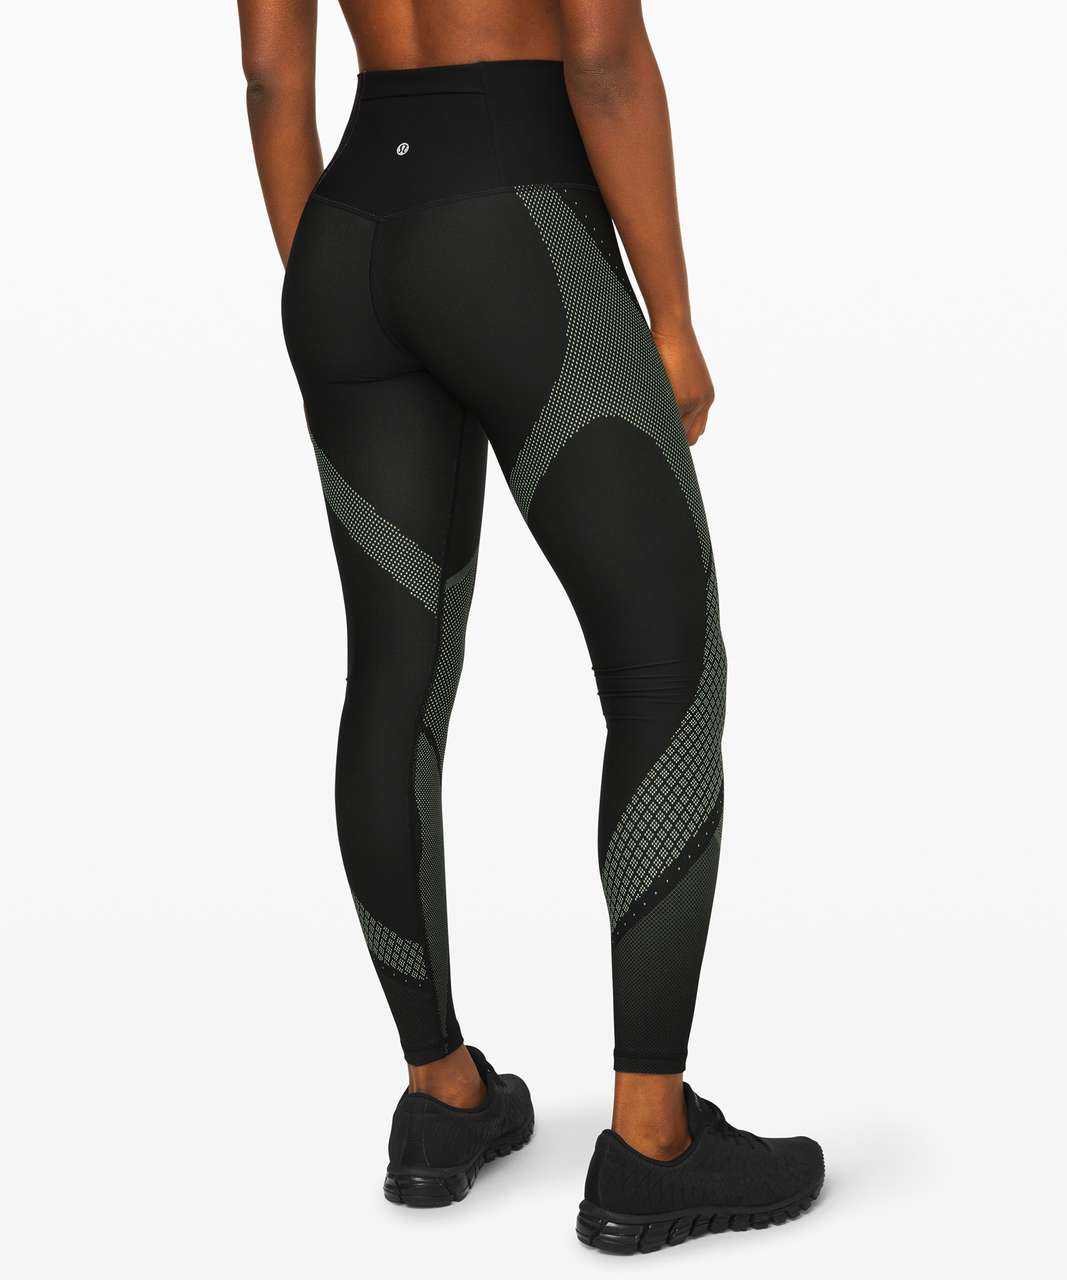 Lululemon Mapped Out High-Rise Tight 28" - Black / Florid Flash